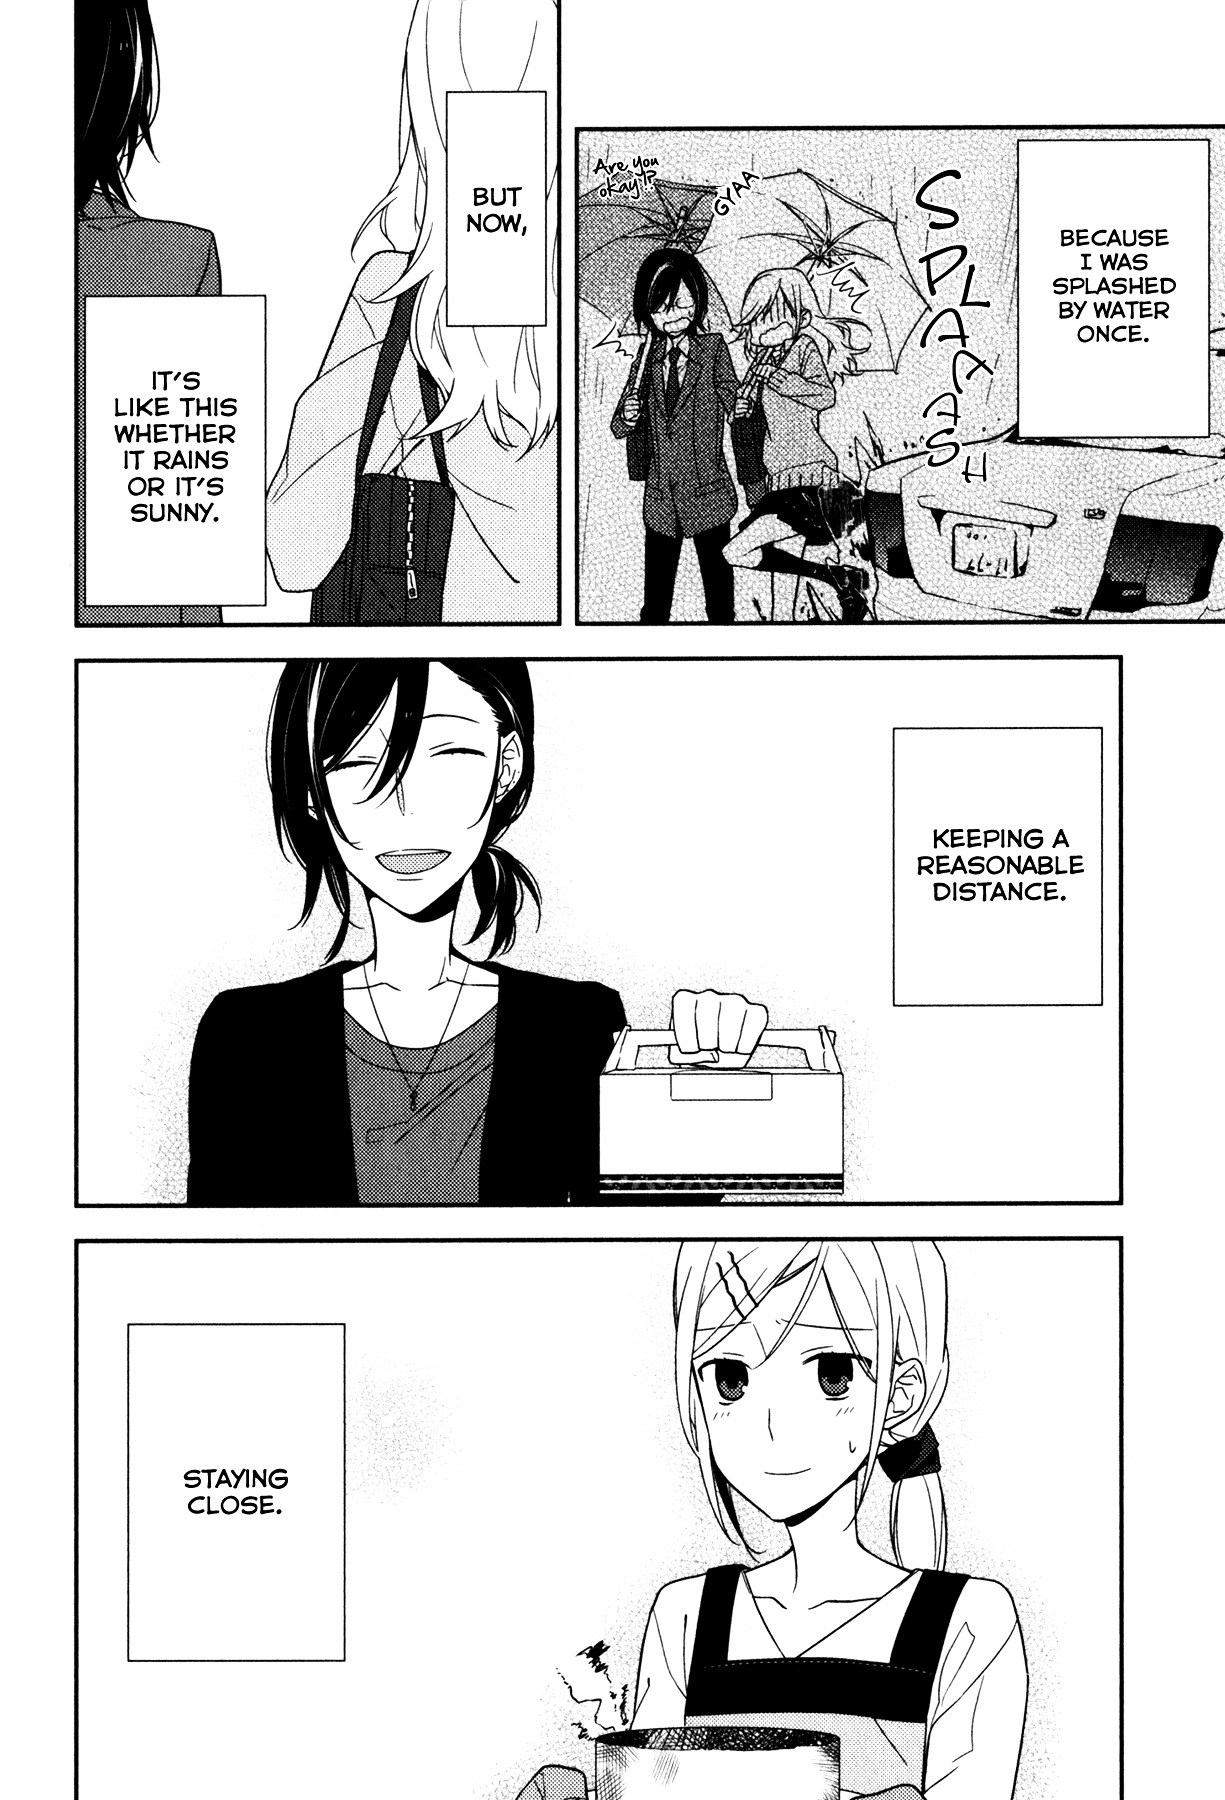 Horimiya Chapter 11 : Page 11 - Picture 3